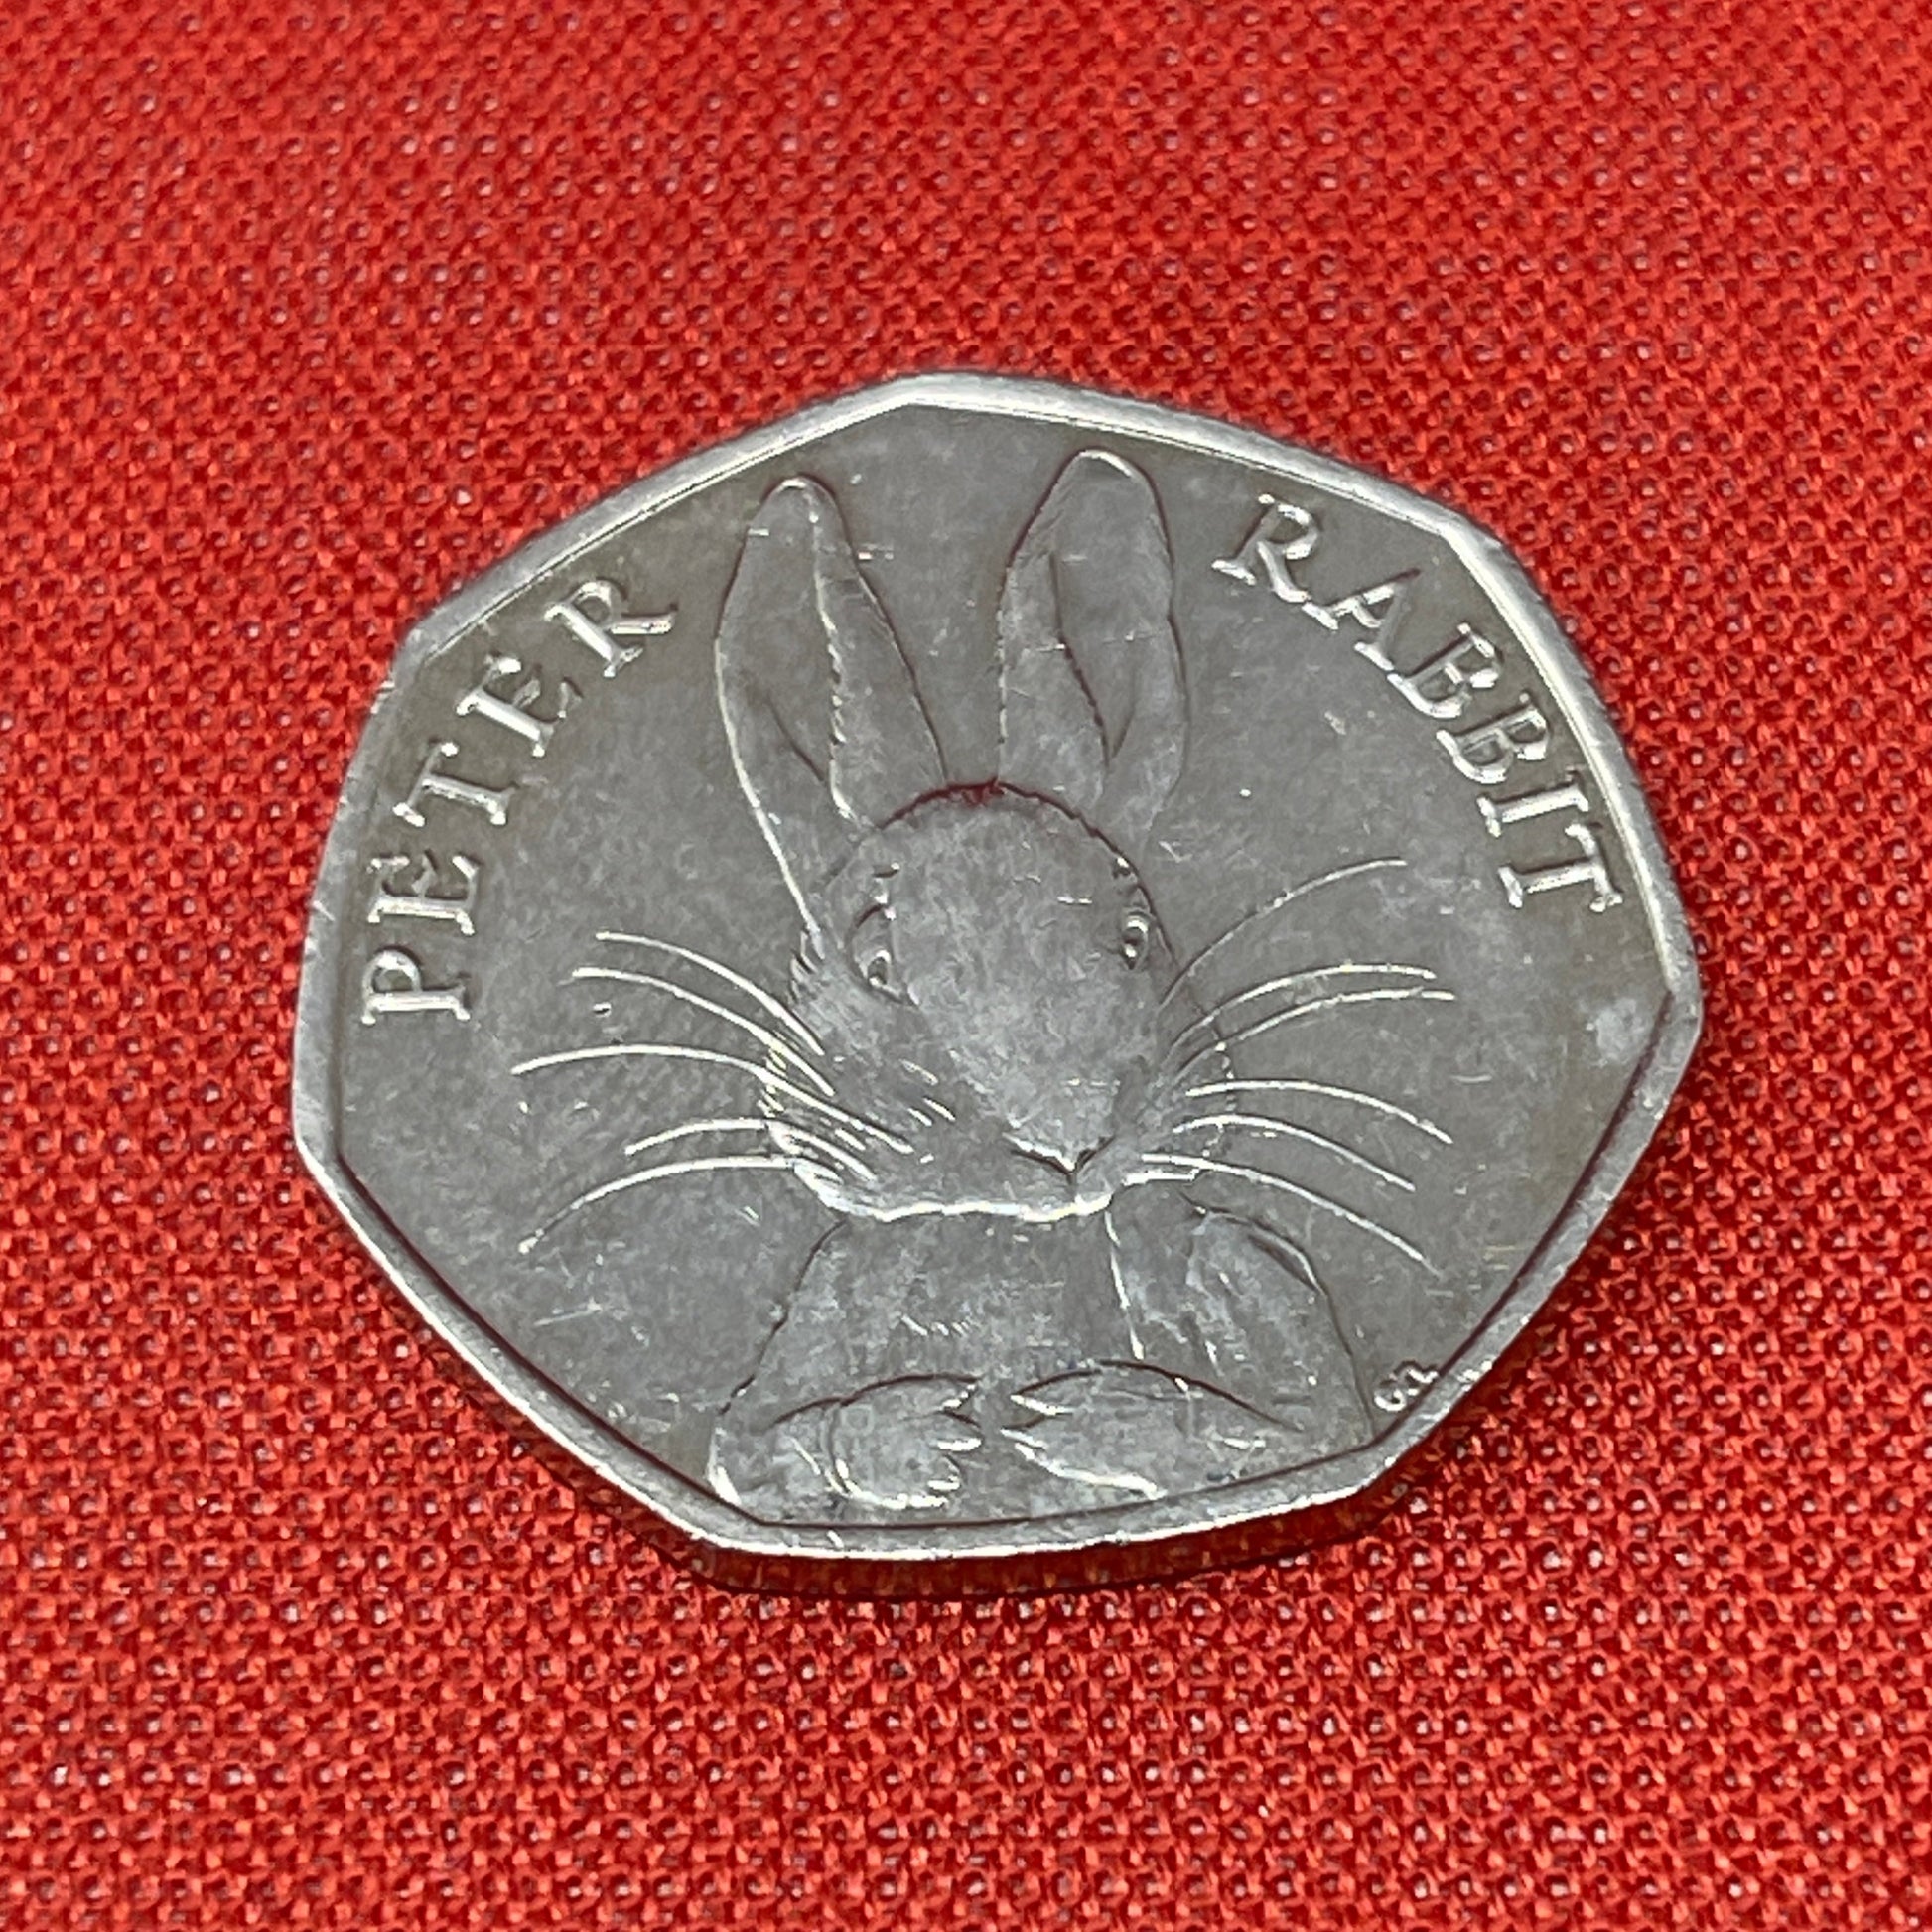 Peter Rabbit 50p Fifty pence Coin Circulated